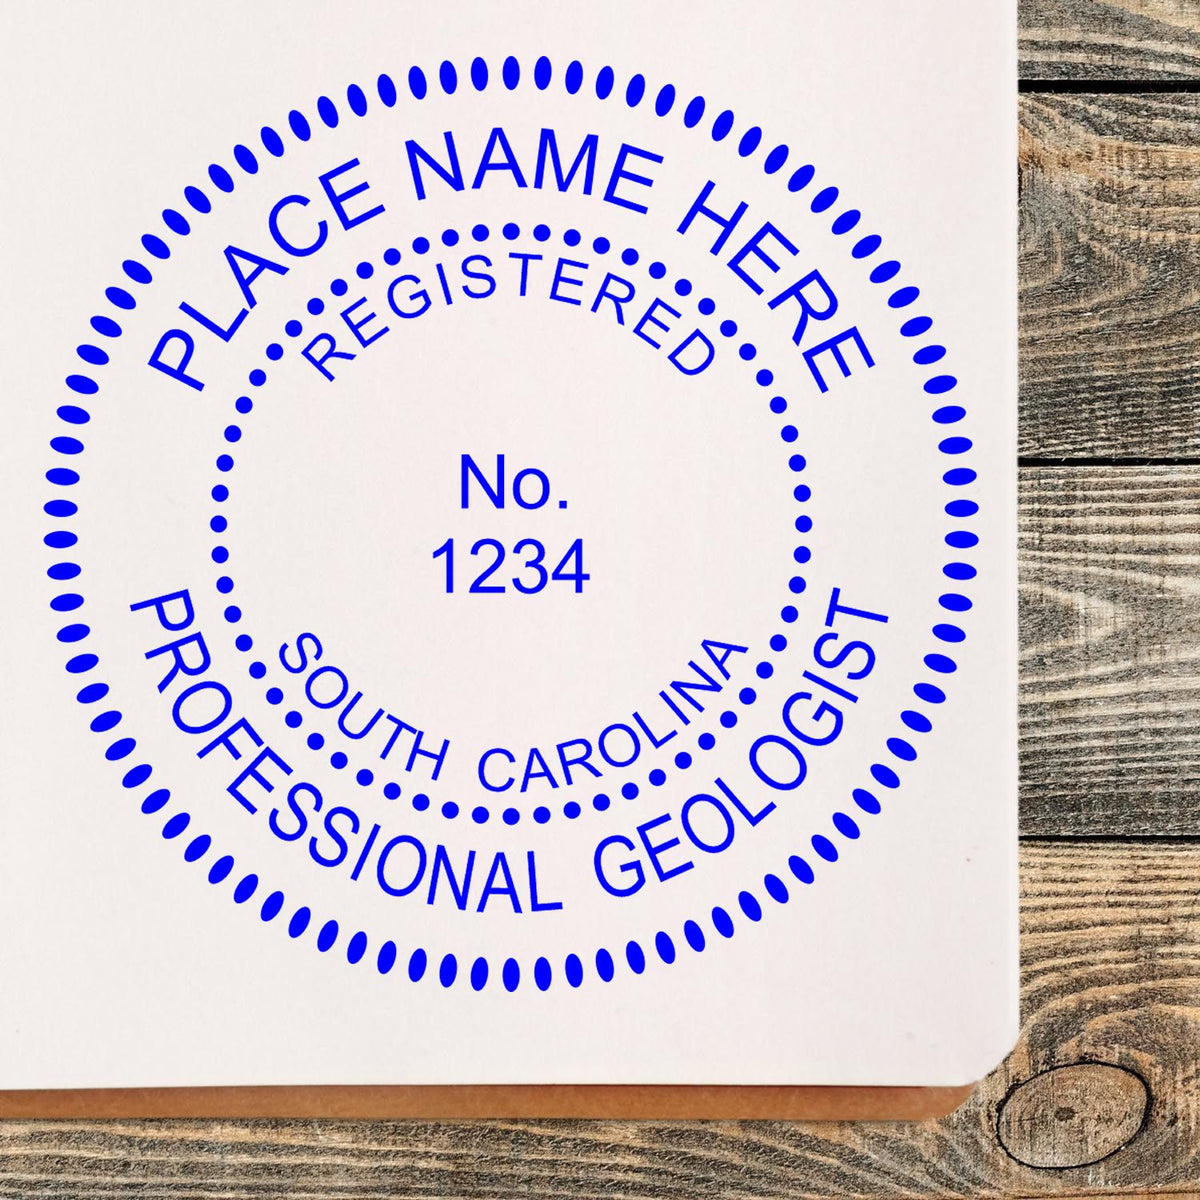 The Slim Pre-Inked South Carolina Professional Geologist Seal Stamp stamp impression comes to life with a crisp, detailed image stamped on paper - showcasing true professional quality.